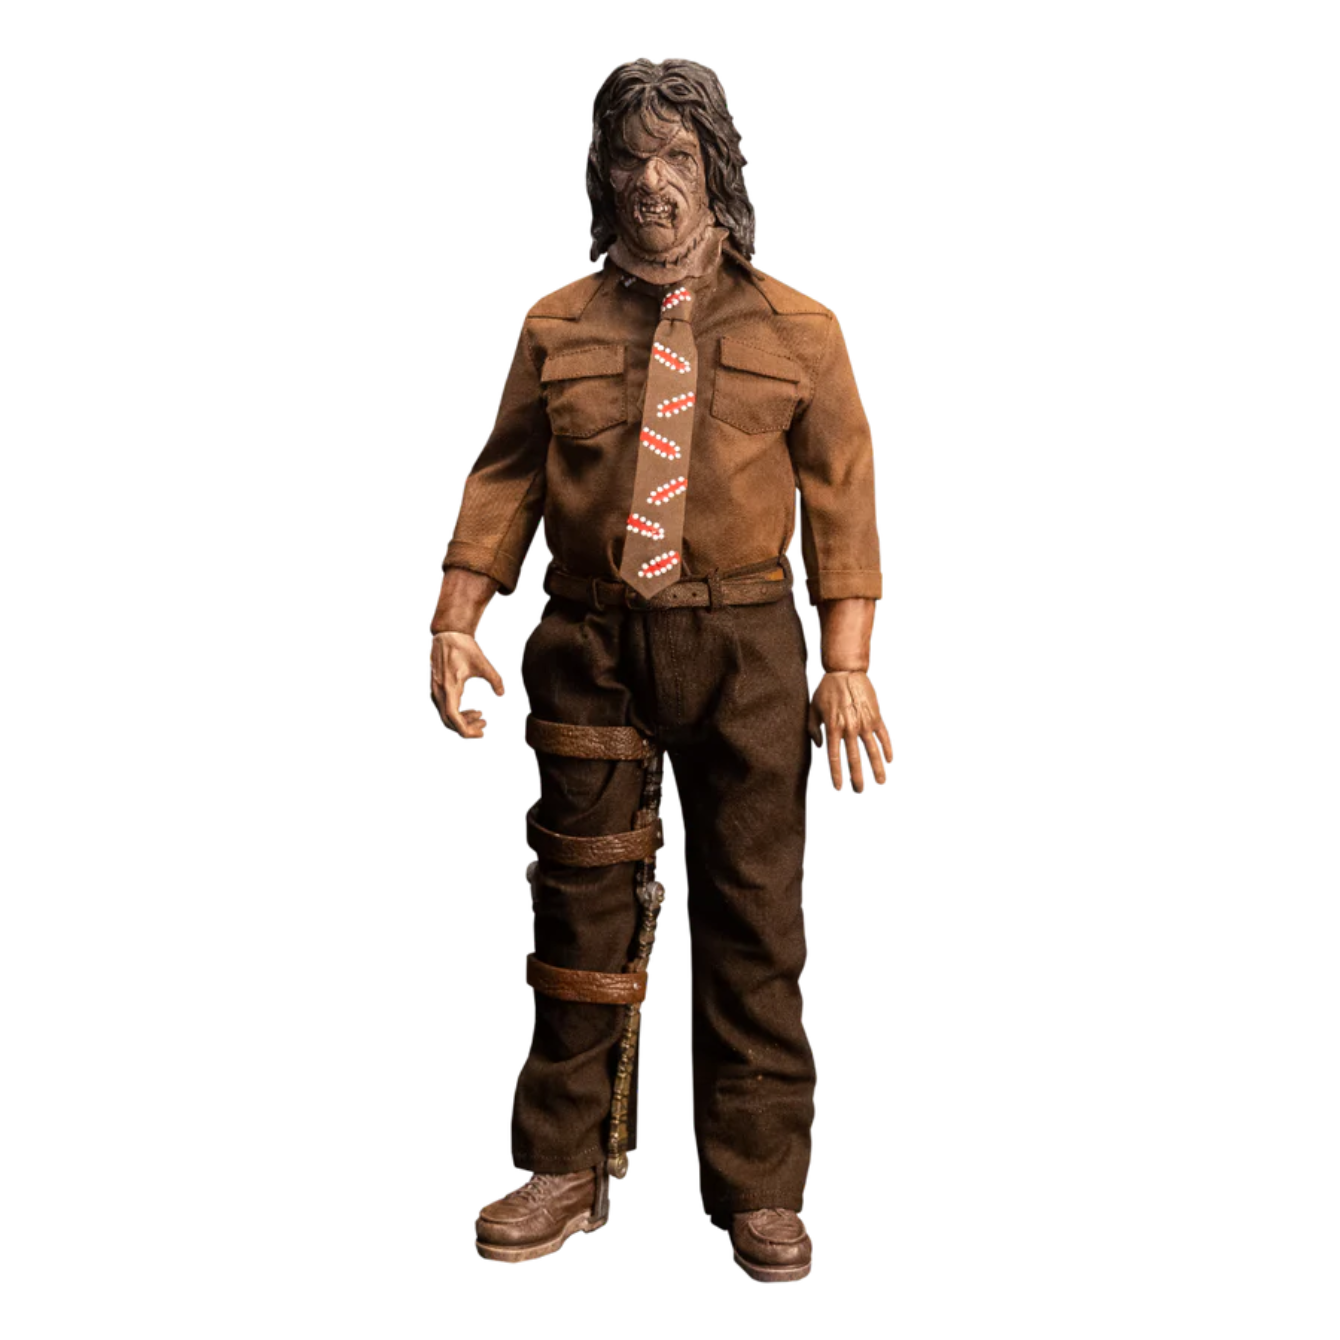 The Texas Chainsaw Massacre III- Leatherface 1:6 Scale Action Figure